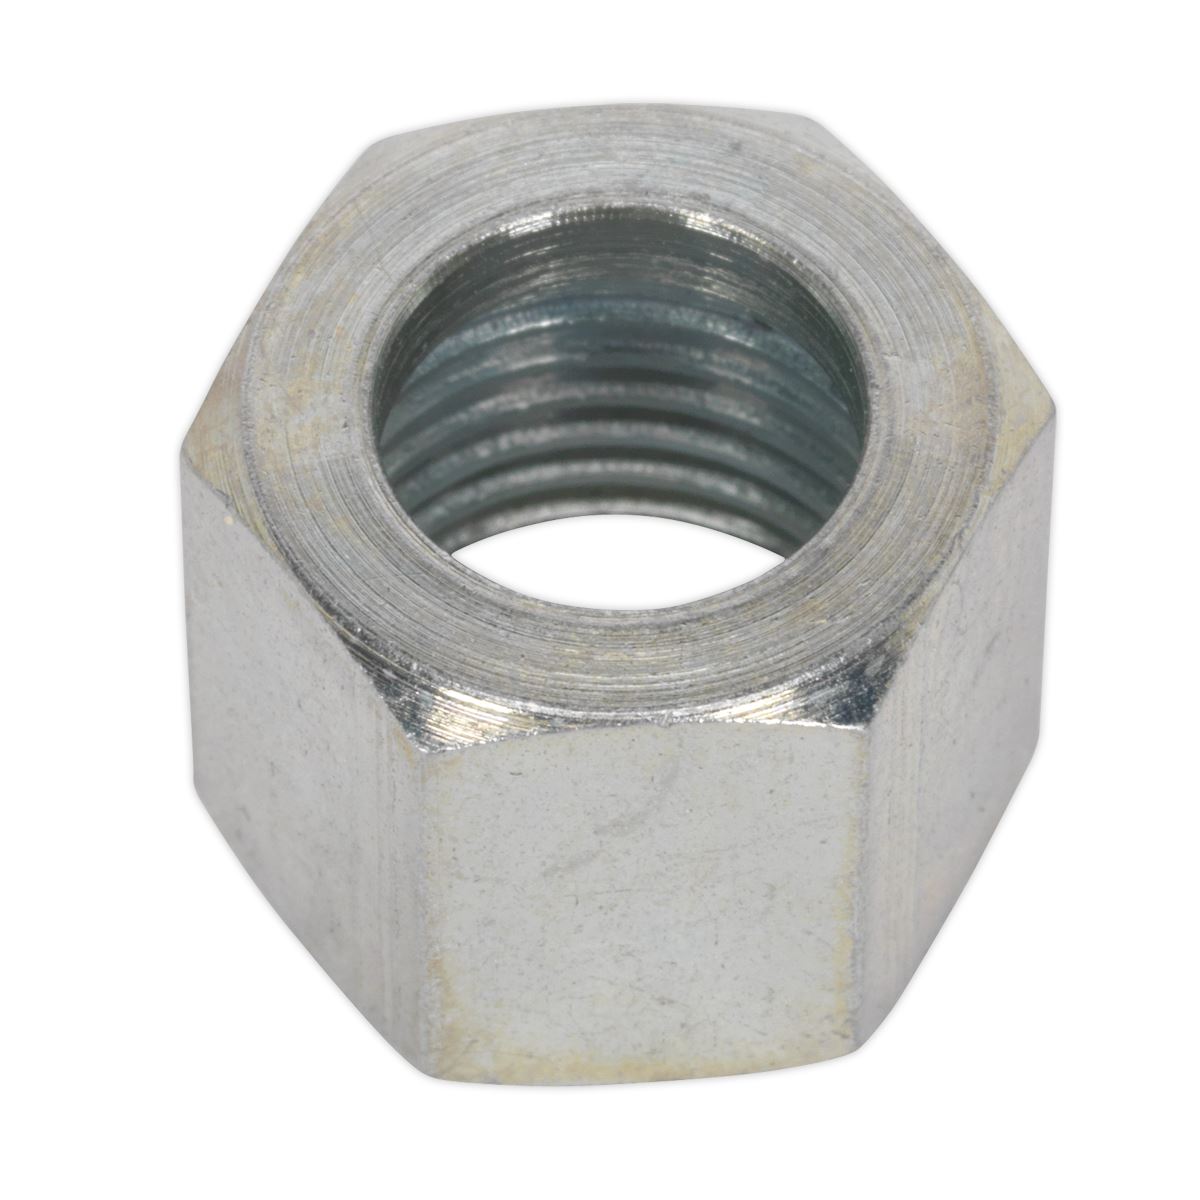 PCL Union Nut 1/4"BSP Pack of 5